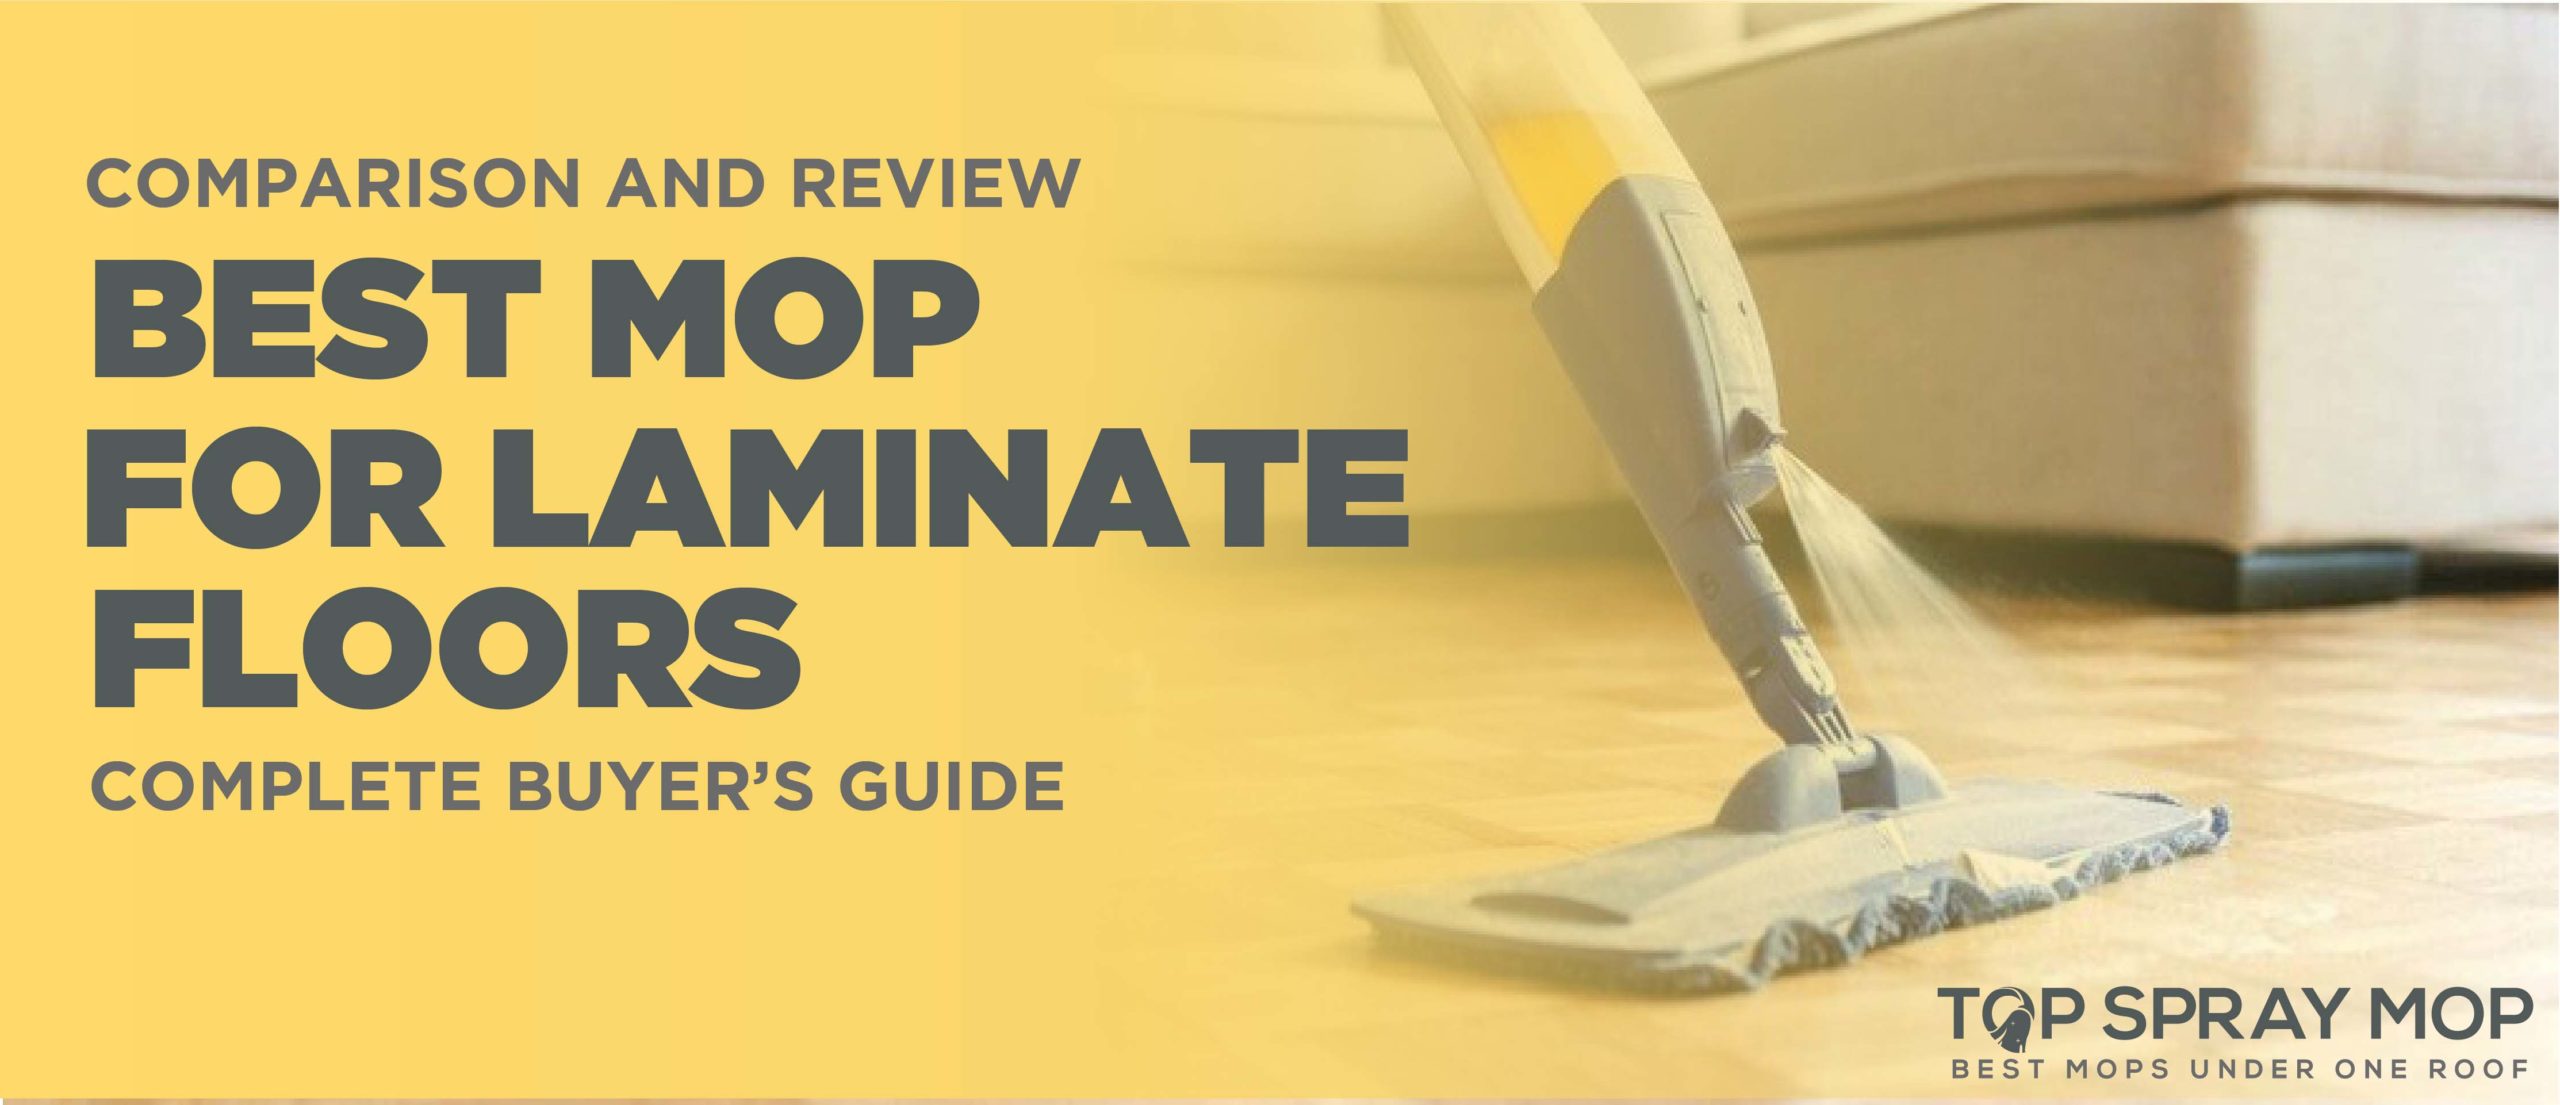 10 Best Mop For Laminate Floors 2021, What Is The Best Mop To Clean Laminate Floors